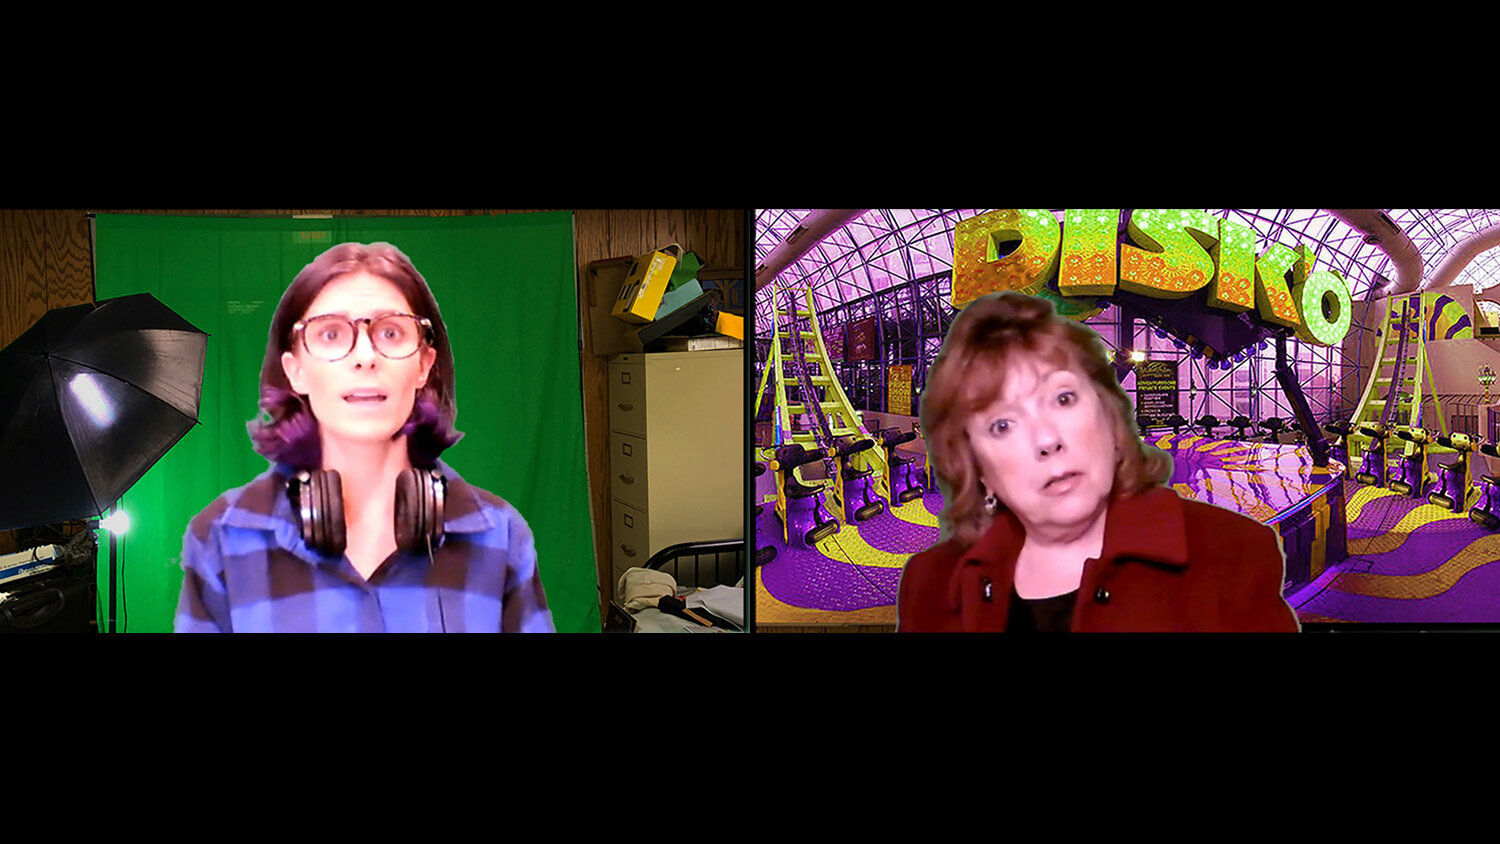  Emily Batsford (left) in a purple flannel shirt in front of a green screen. Paula Ewin (right) in a green-screened amusement park. 